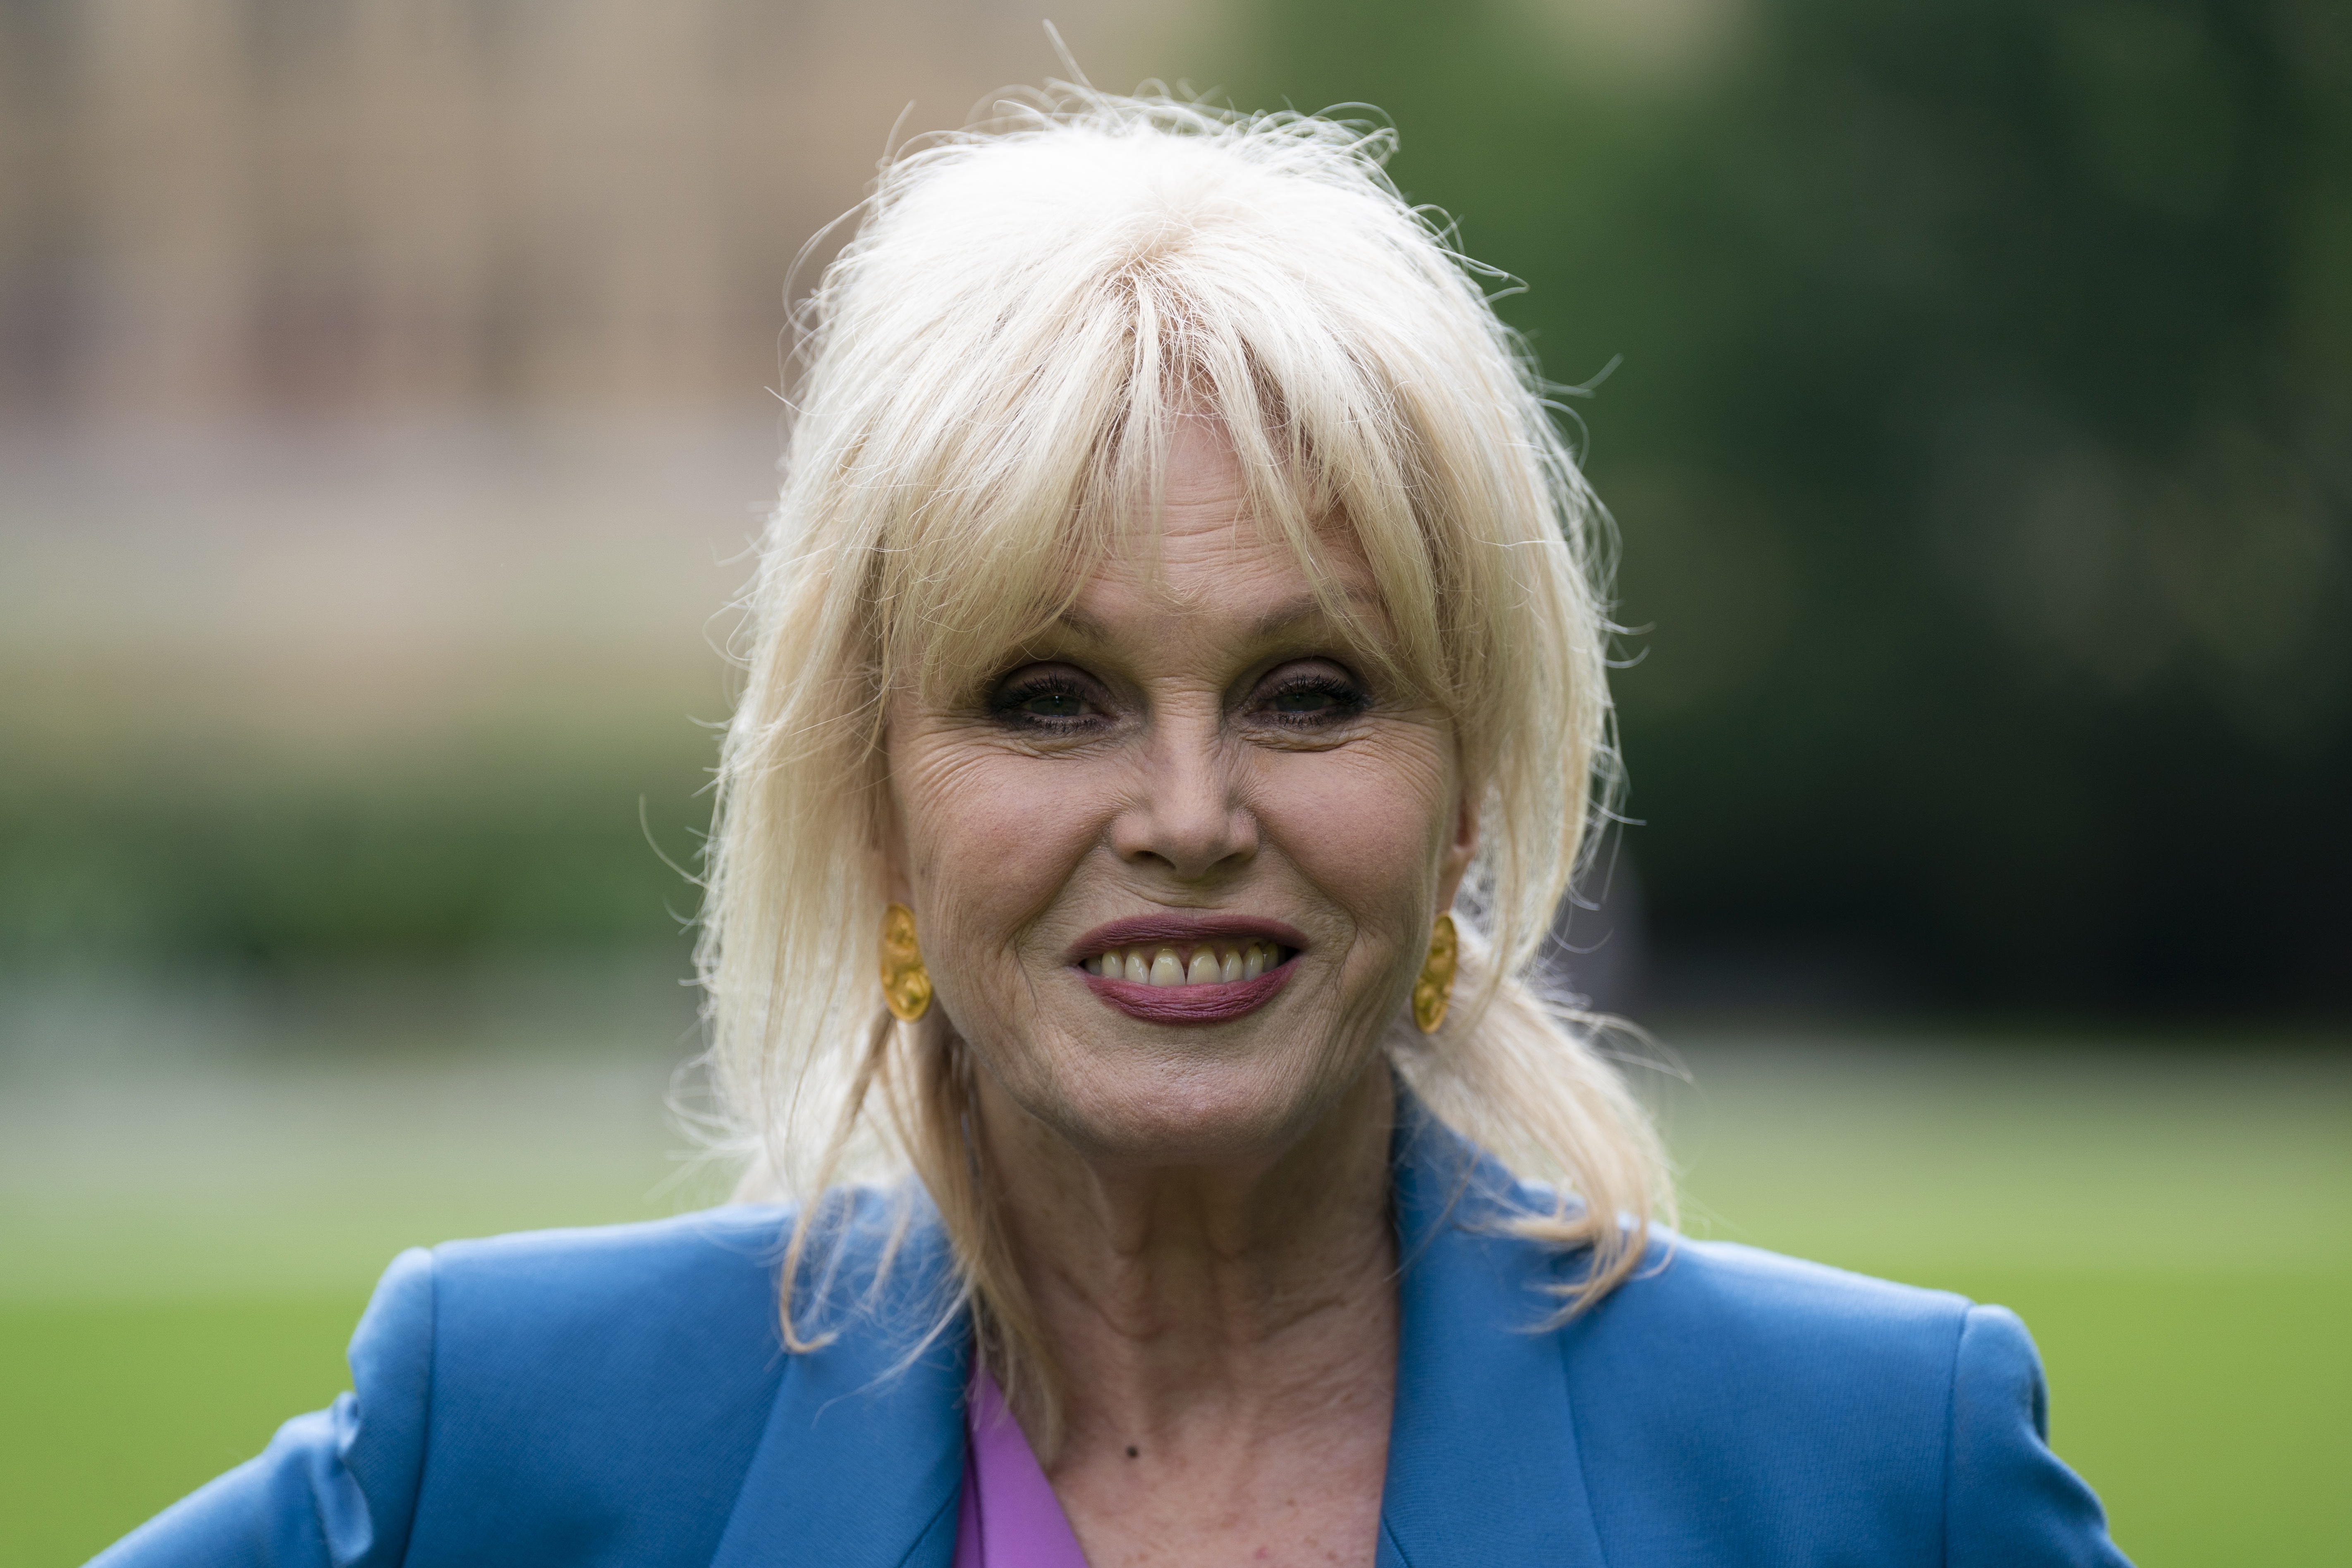 Joanna Lumley in Westminster, London, England, on May 23, 2022 | Source: Getty Images